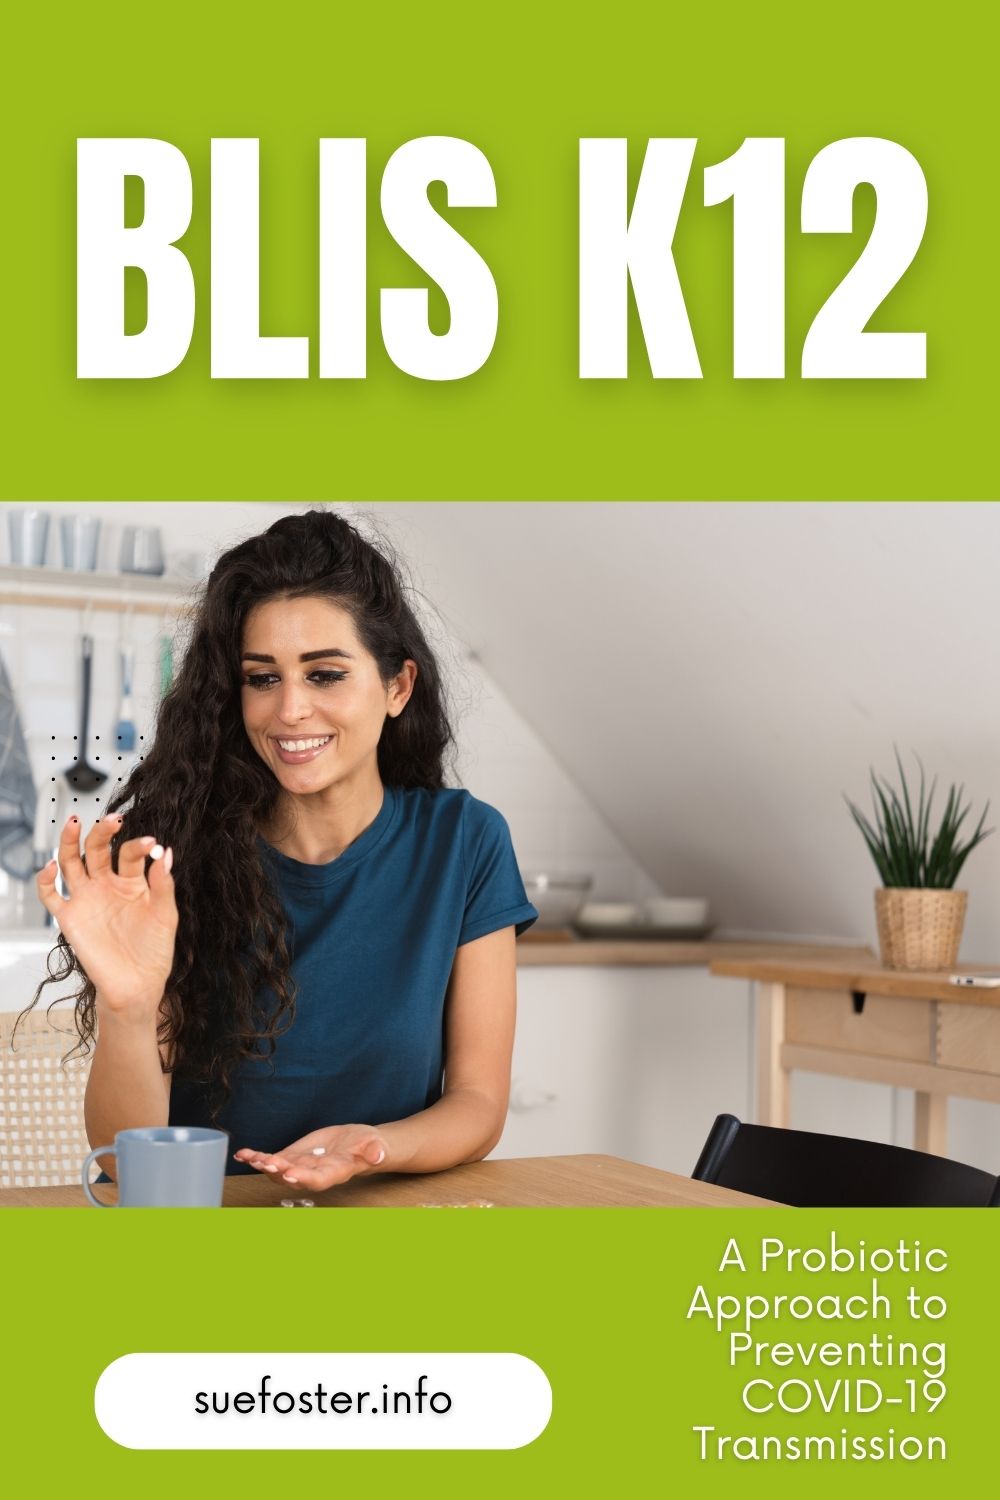 Guard against COVID-19 with BLIS K12! Find out more about its benefits, including enhanced oral health and potential immunity support. 